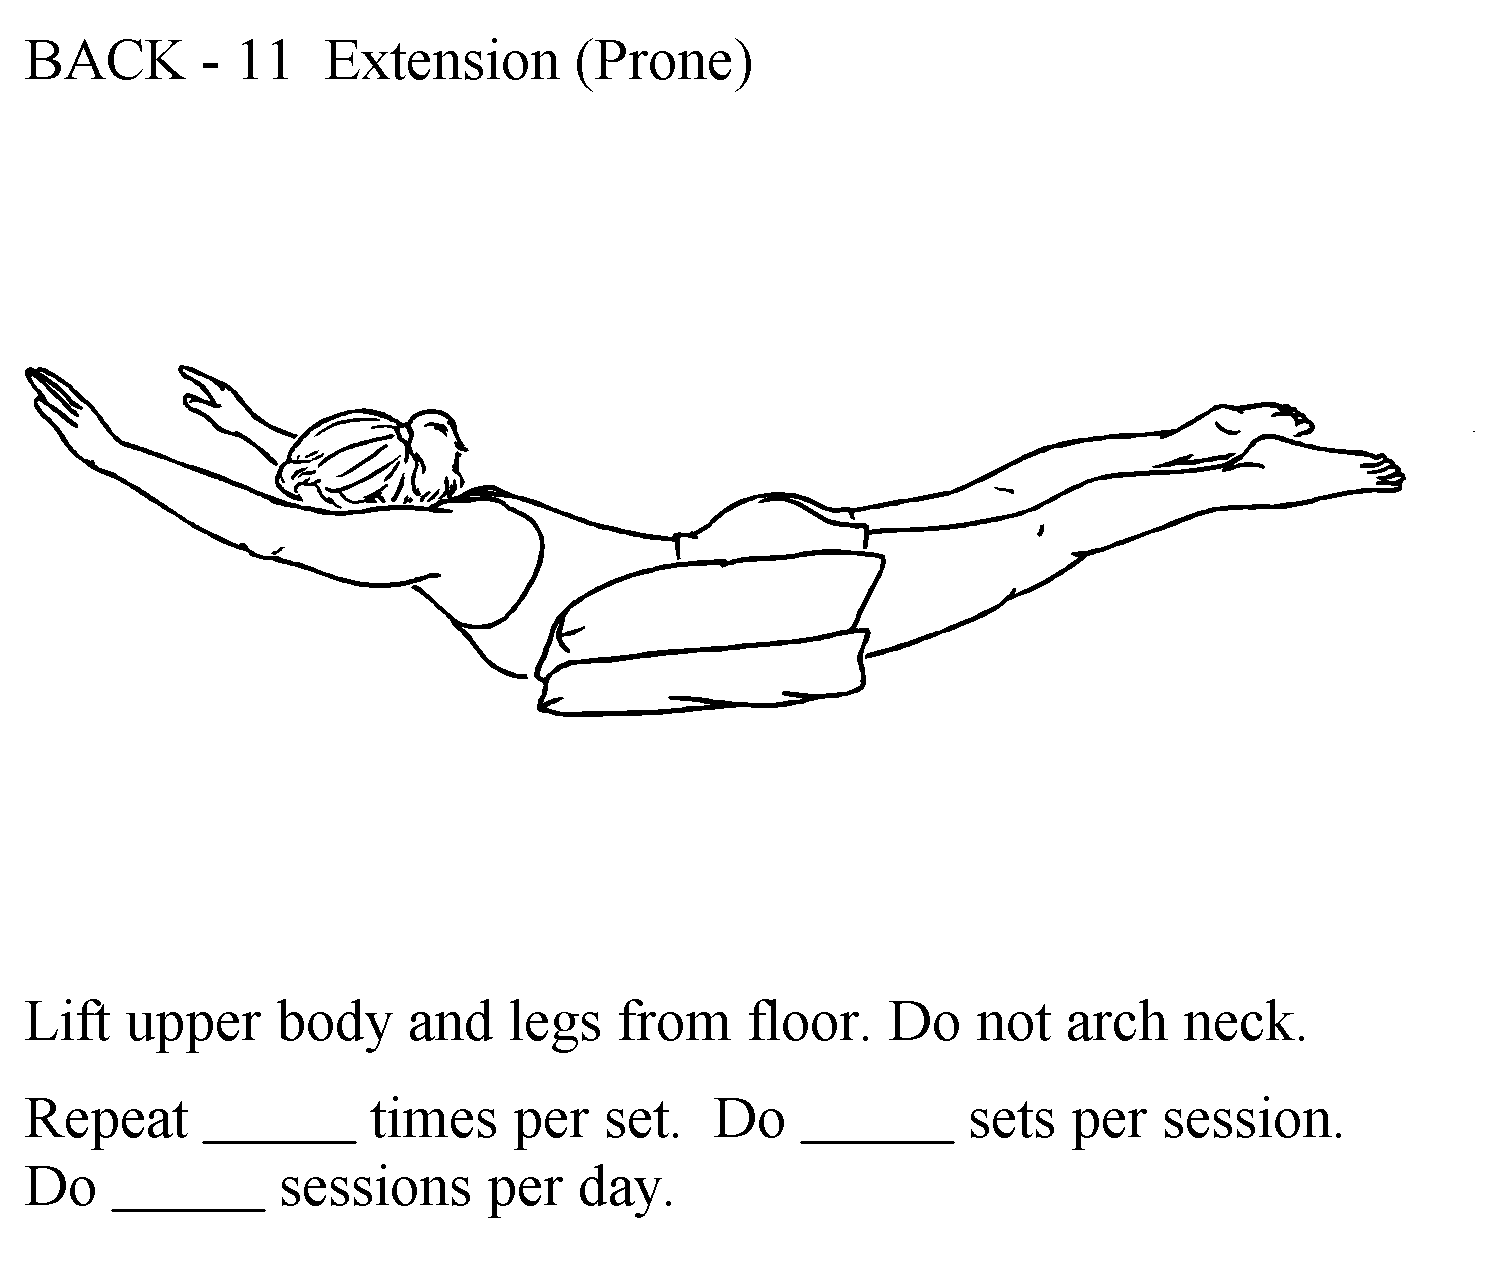 Woman lying on belly with pillow under front of pelvis, raising arms overhead and raising legs up off the follor